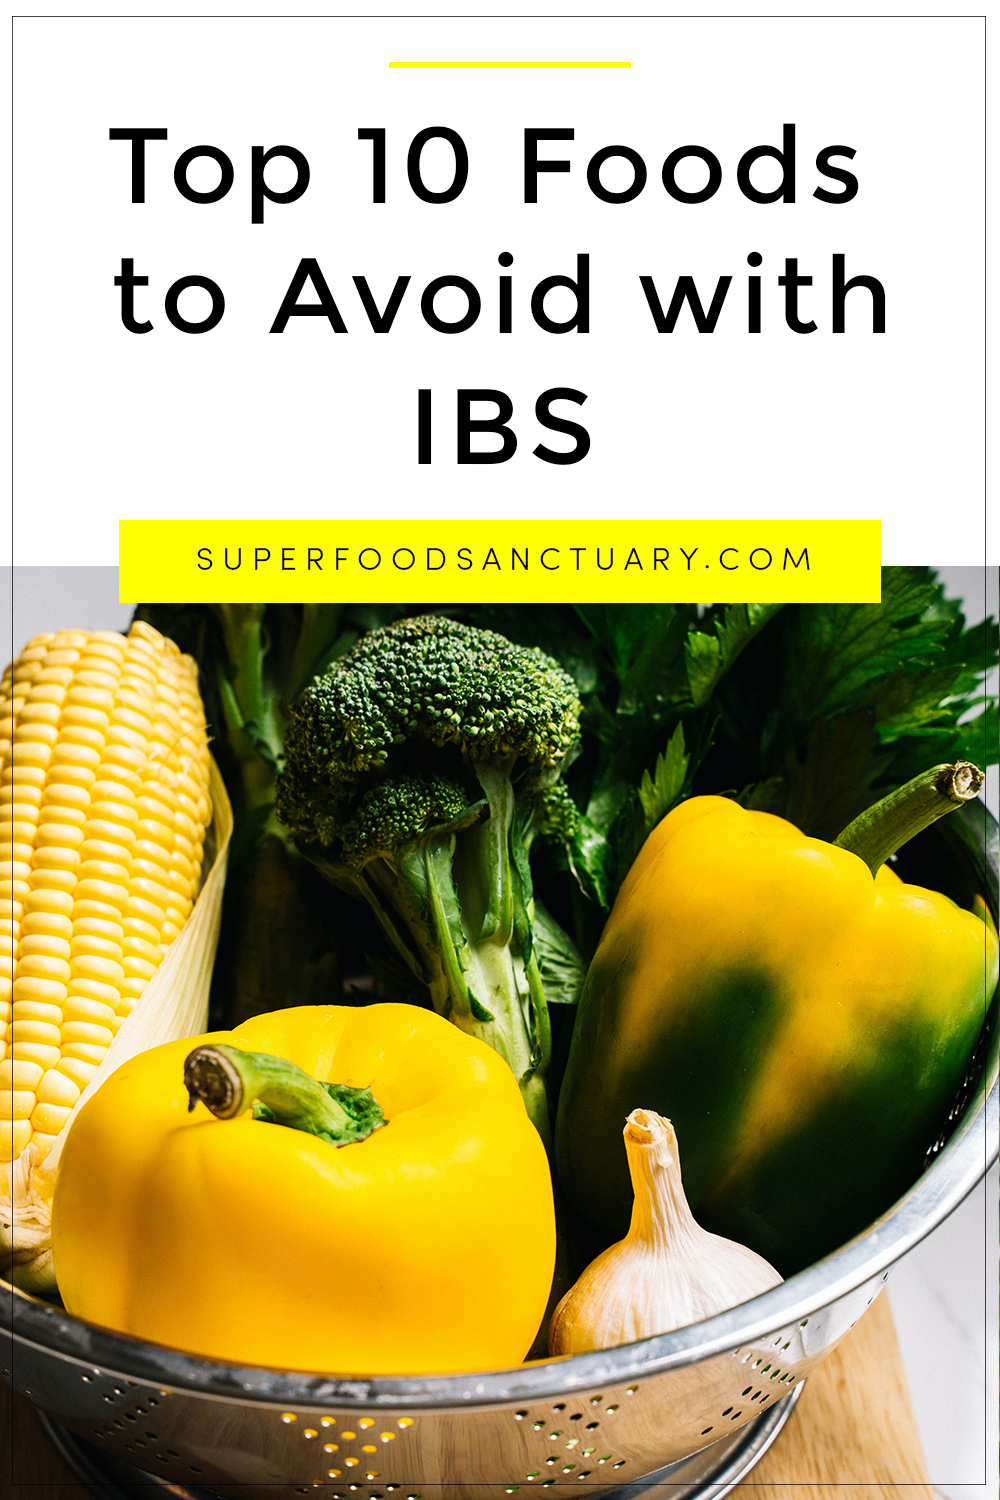 10 Foods to Avoid with IBS (Irritable Bowel Syndrome) - Superfood Sanctuary